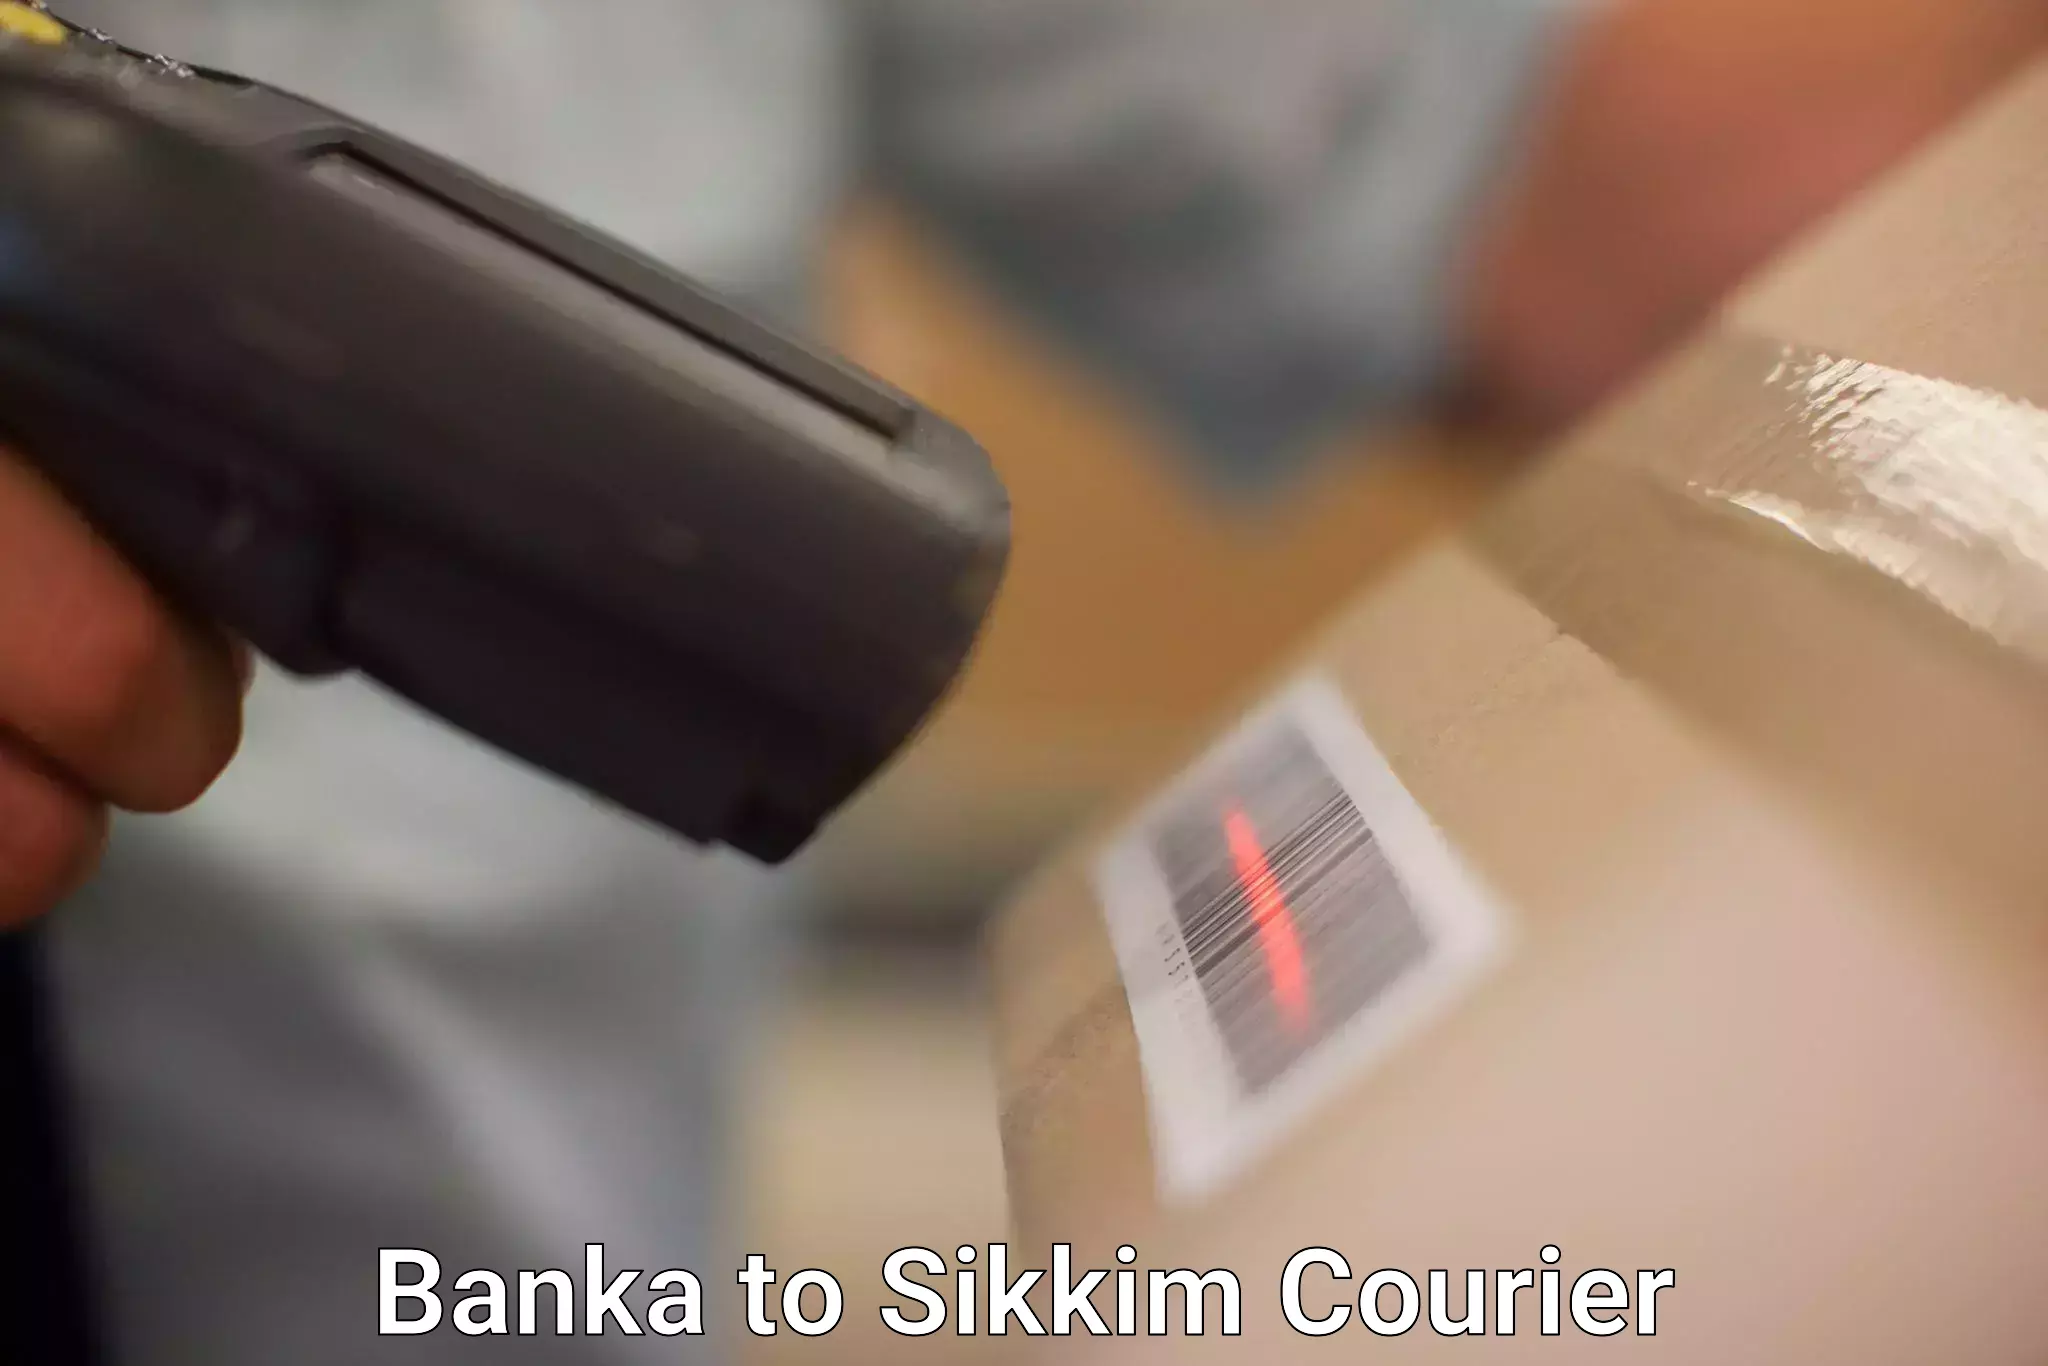 Advanced courier platforms Banka to Pelling